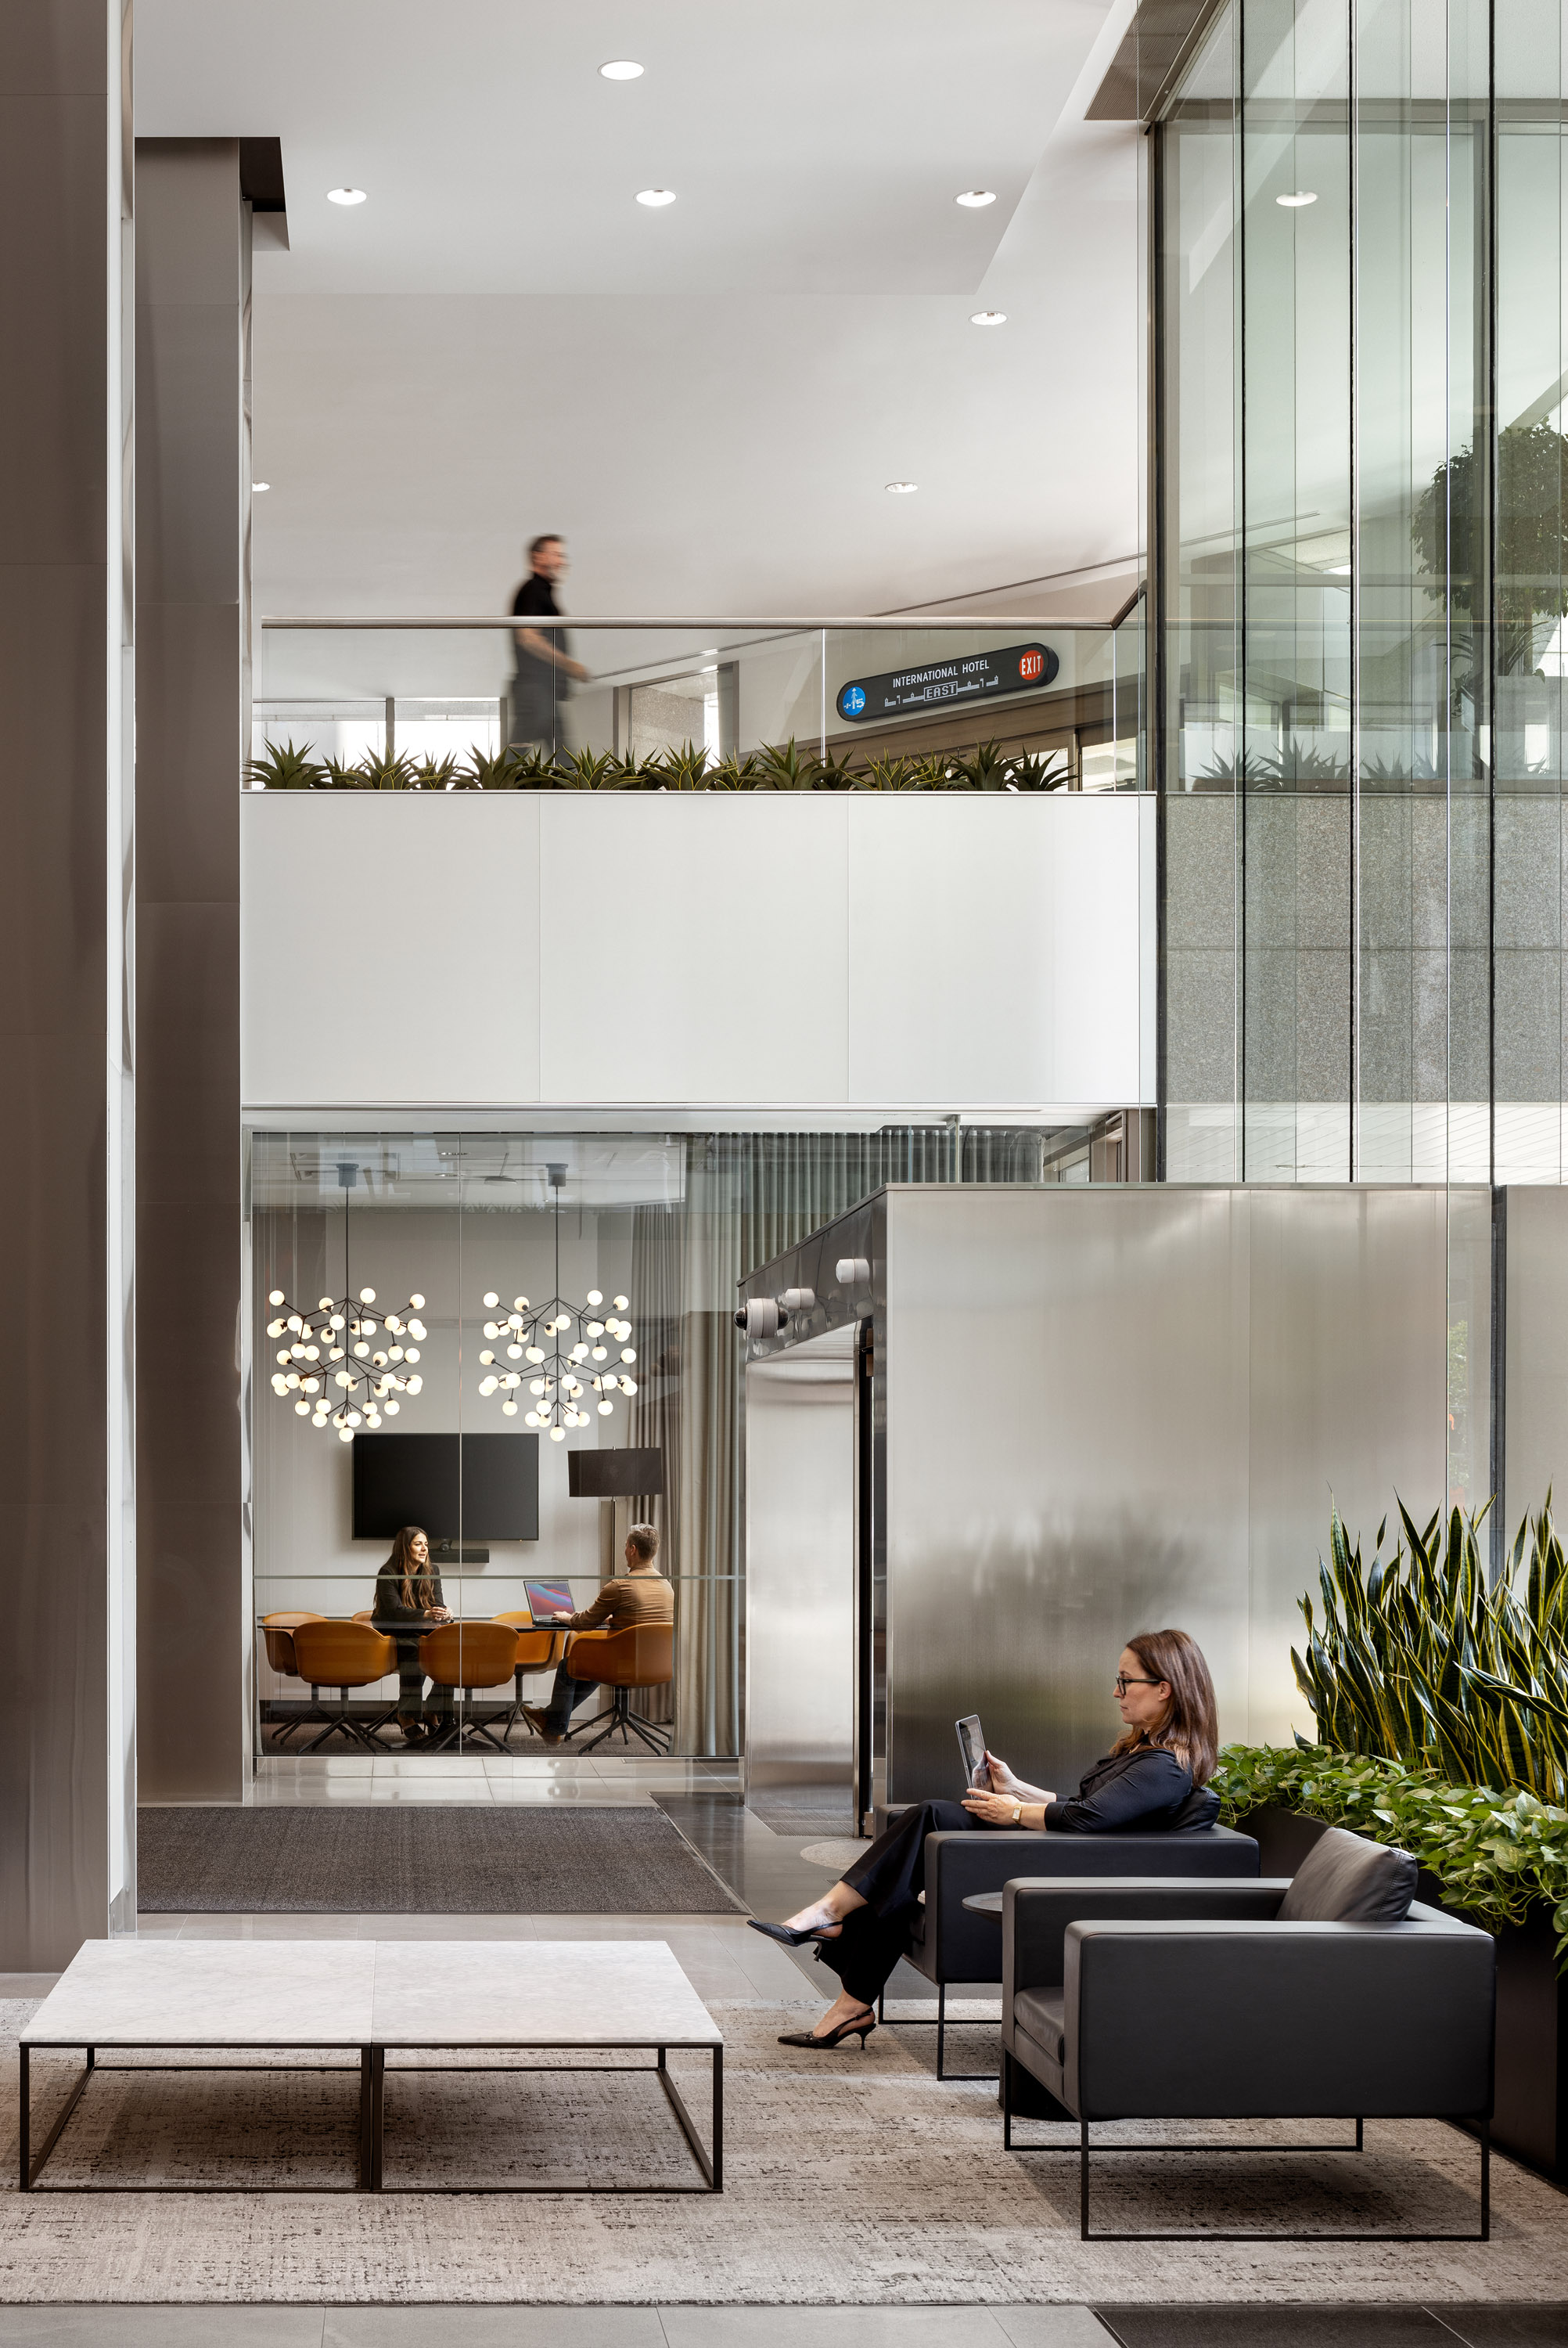 240-Fourth-calgary-office-interior-photography-eymeric-widling11